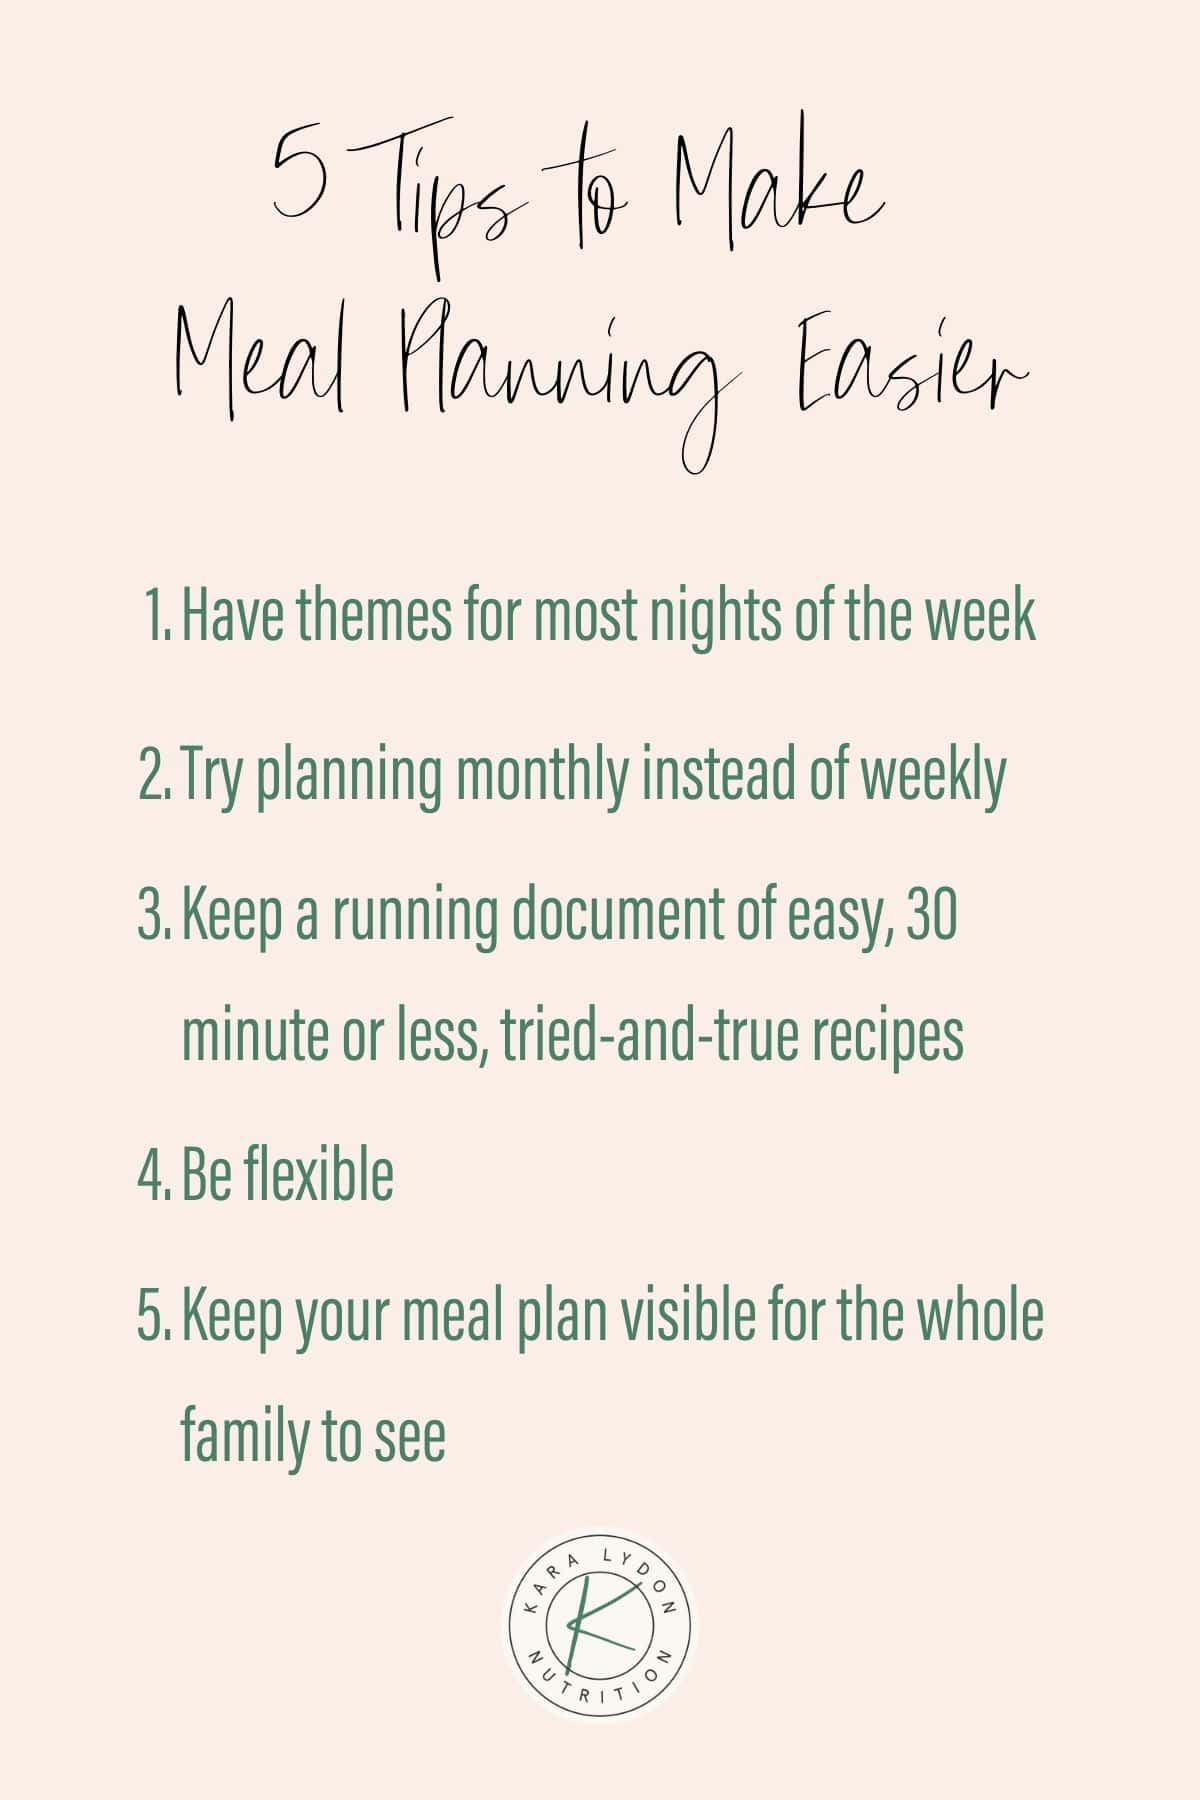 Pink chart with a 1-5 list of tips to make meal planning easier.